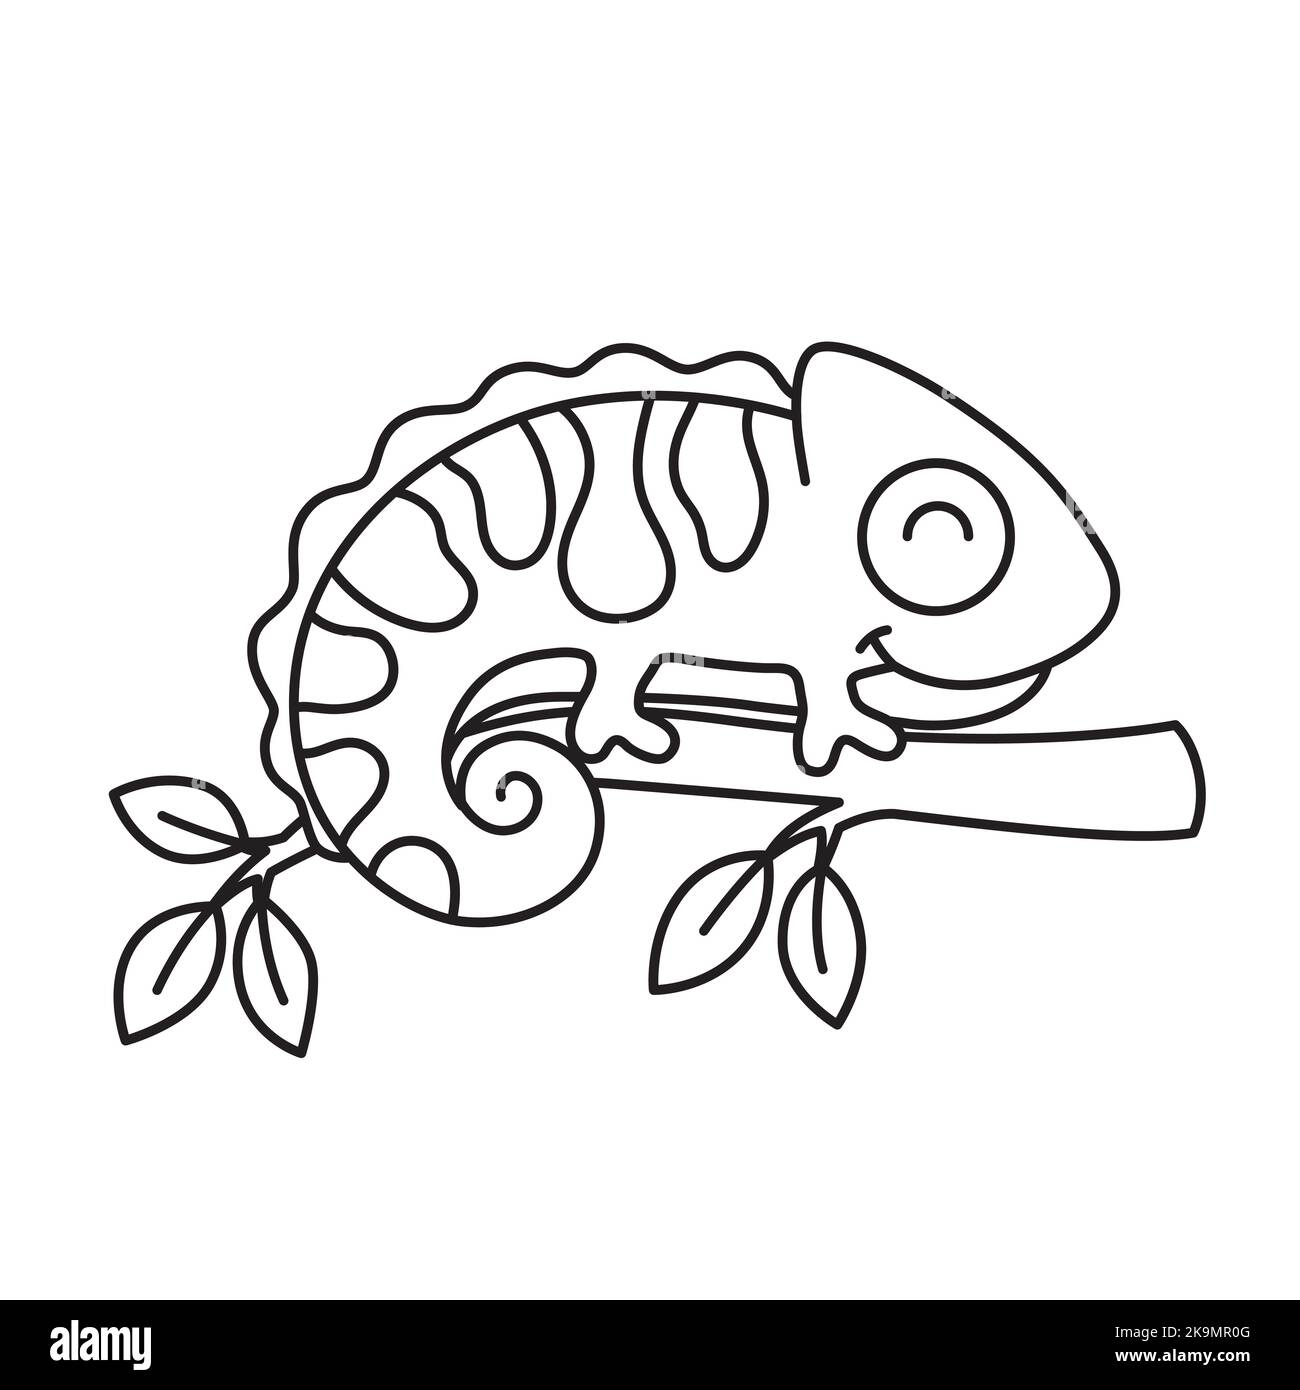 Vector coloring book illustration. Cute bright chameleon in cartoon style Stock Vector